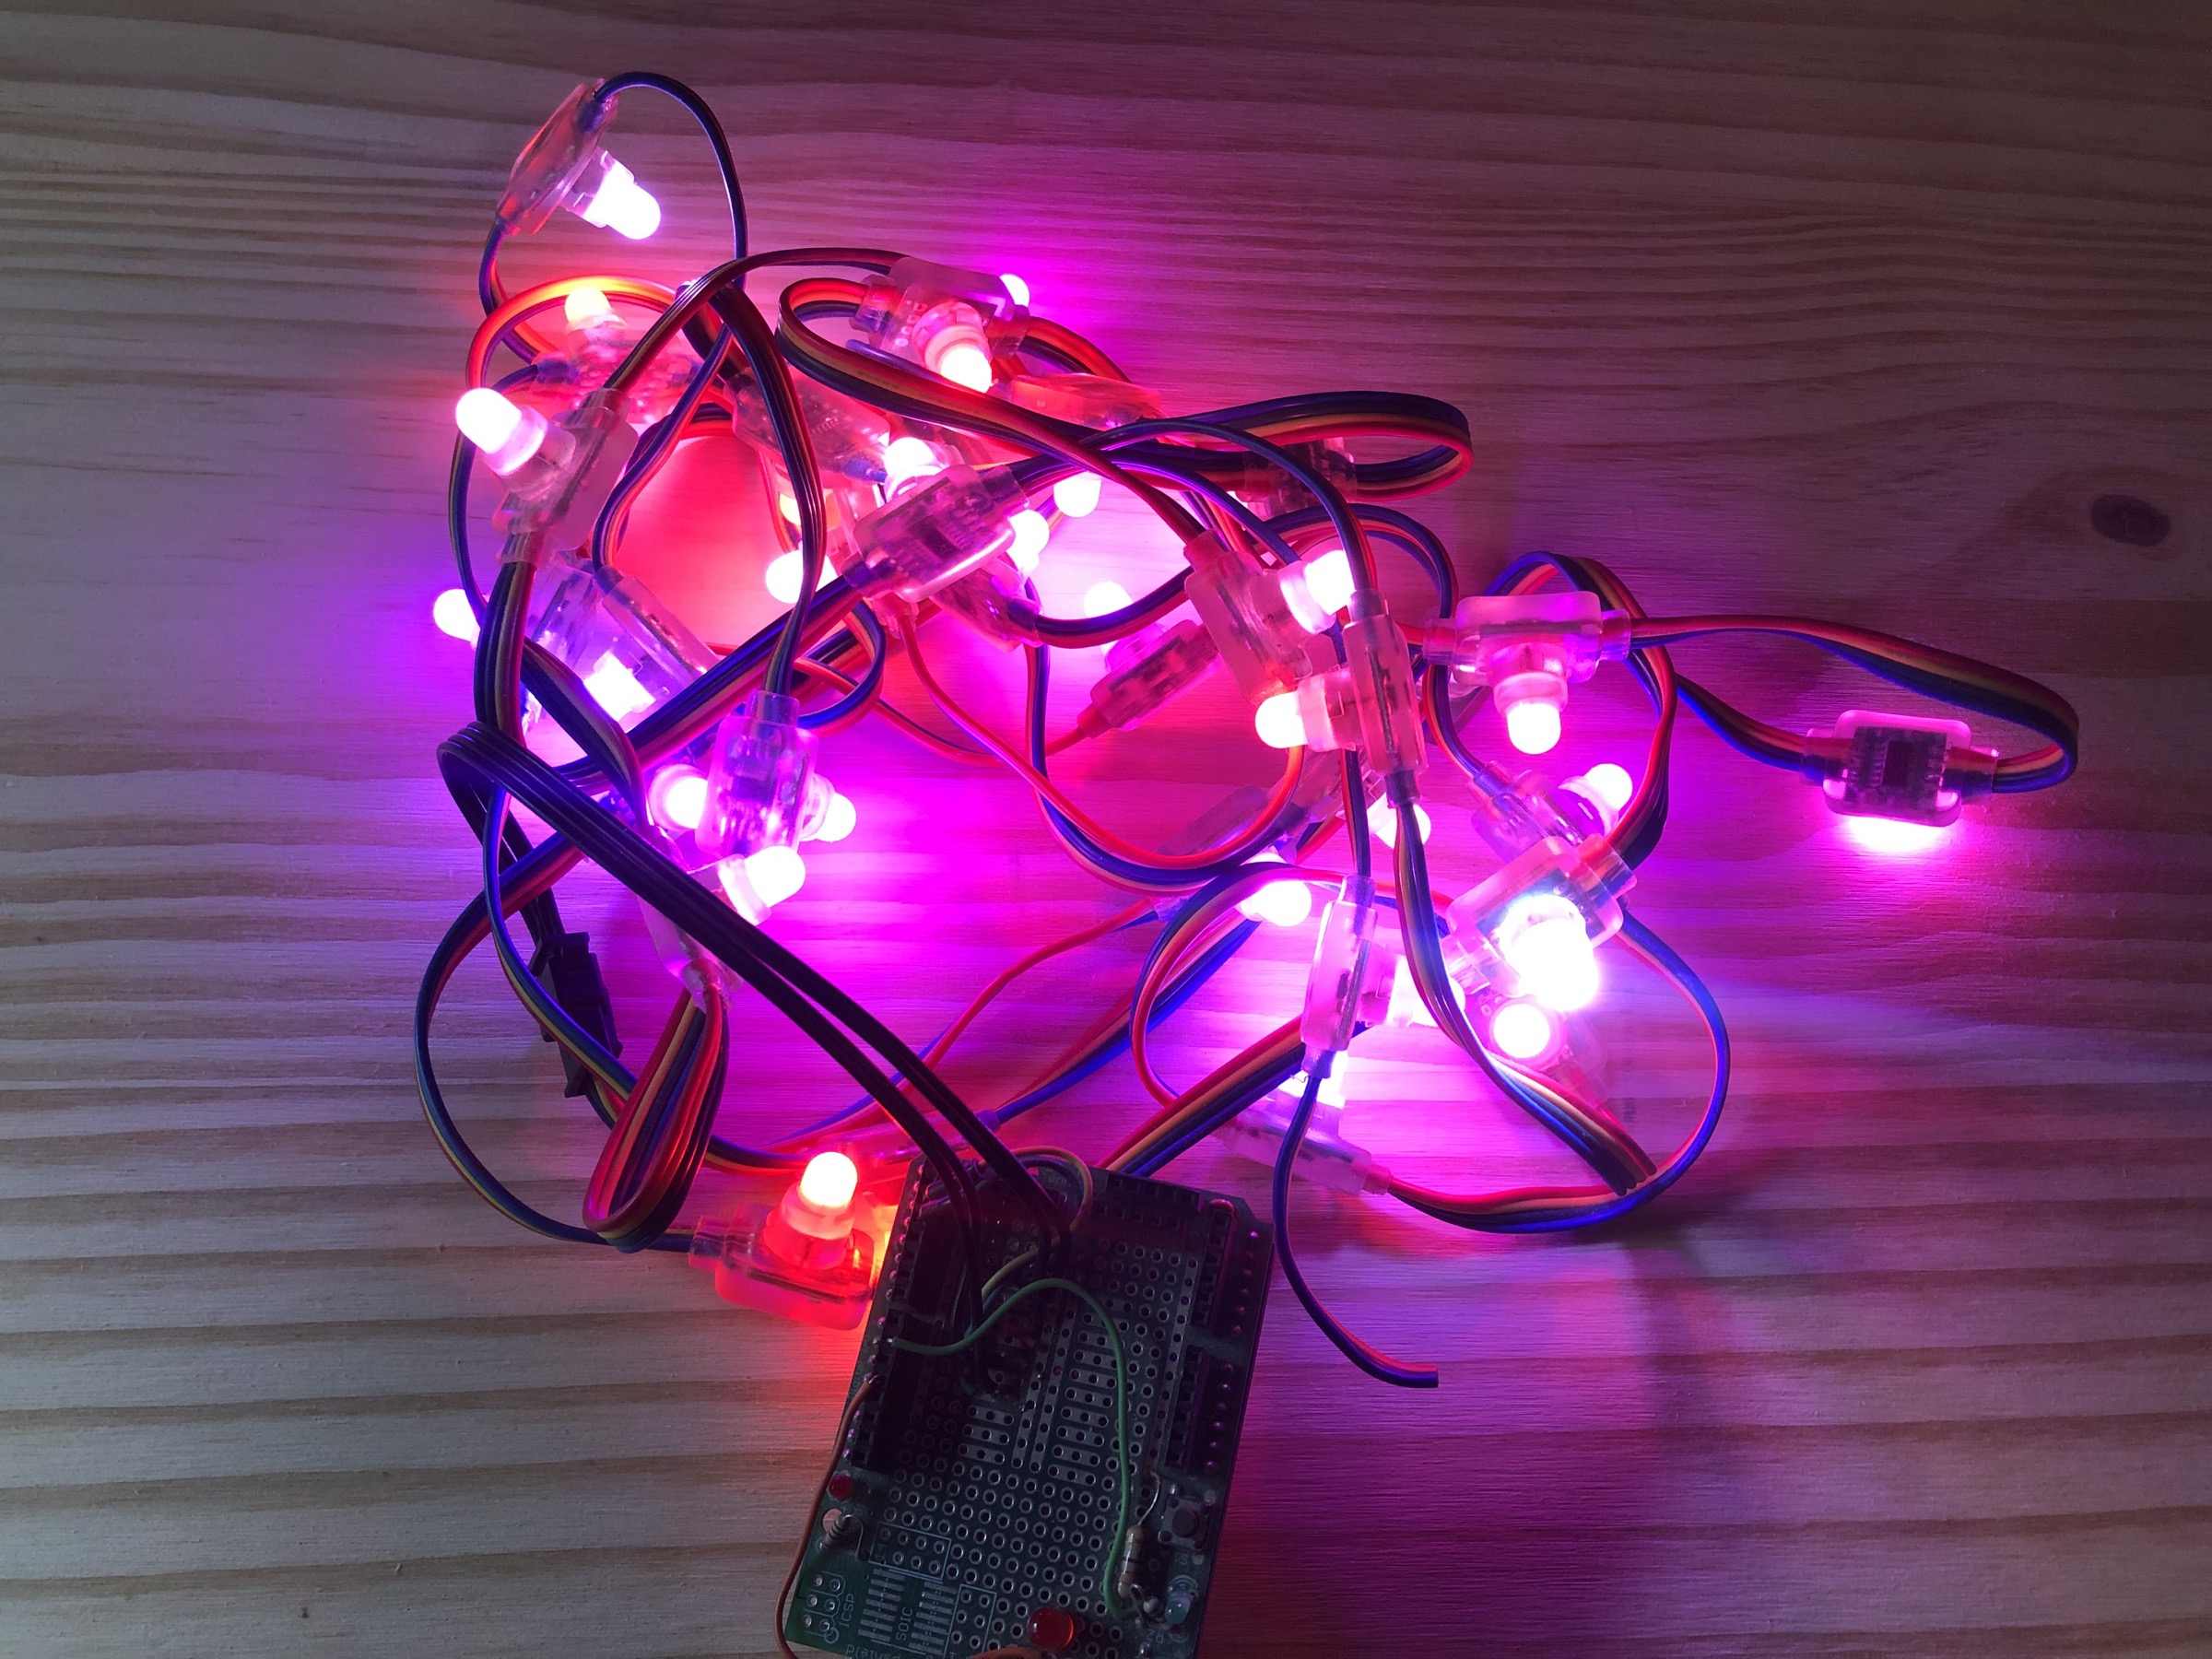 A heap of wired LEDs, all displaying a color ranging from white, to pink, to red, to purple, and everything in between.